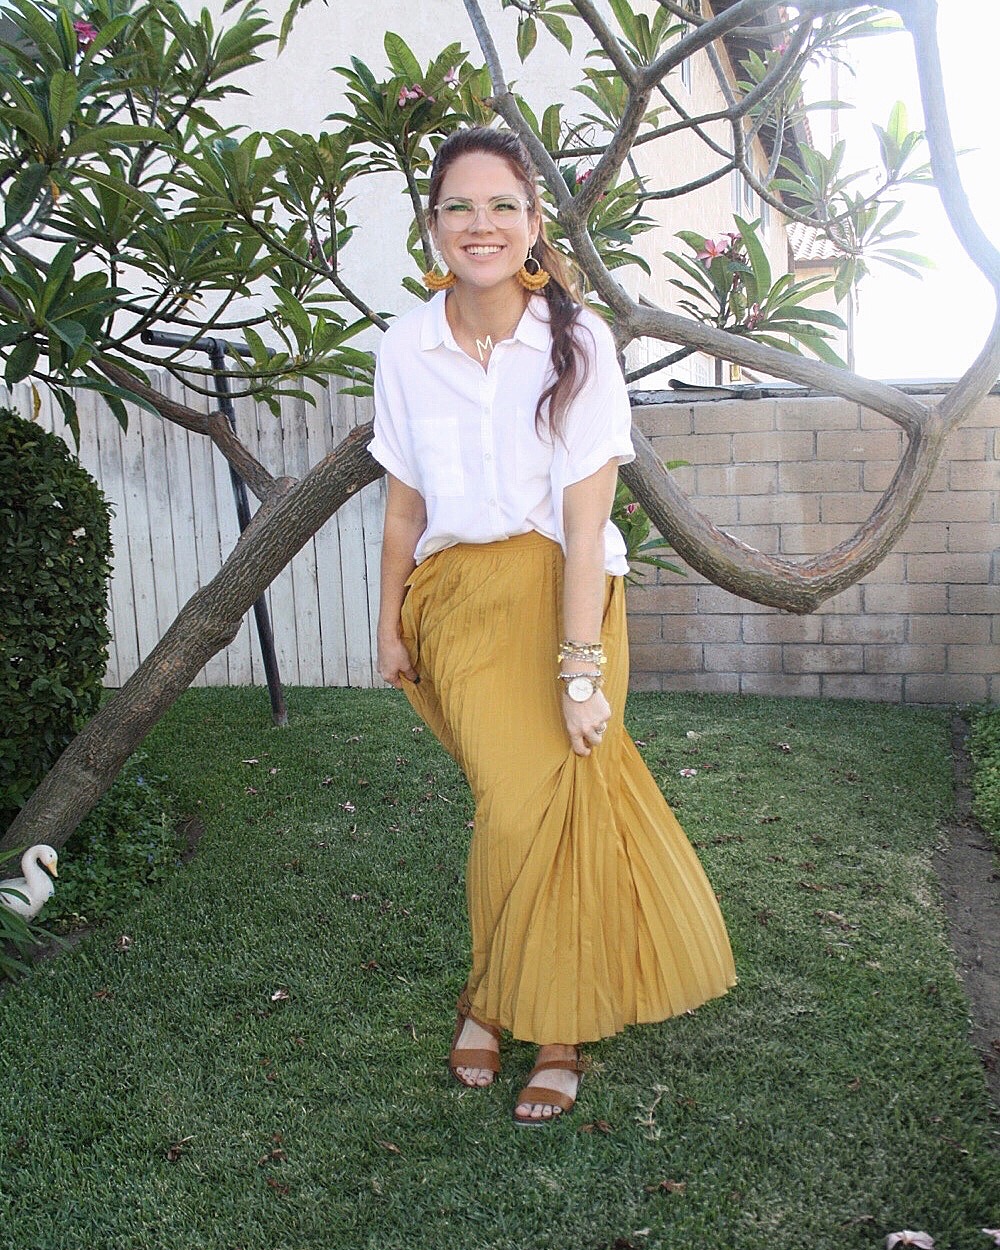 Katie Dunlavy, Lularoe boutique owner, of The Pearl Pages standing outside smiling in the grass by a tree in a long yellow skirt and white shirt.